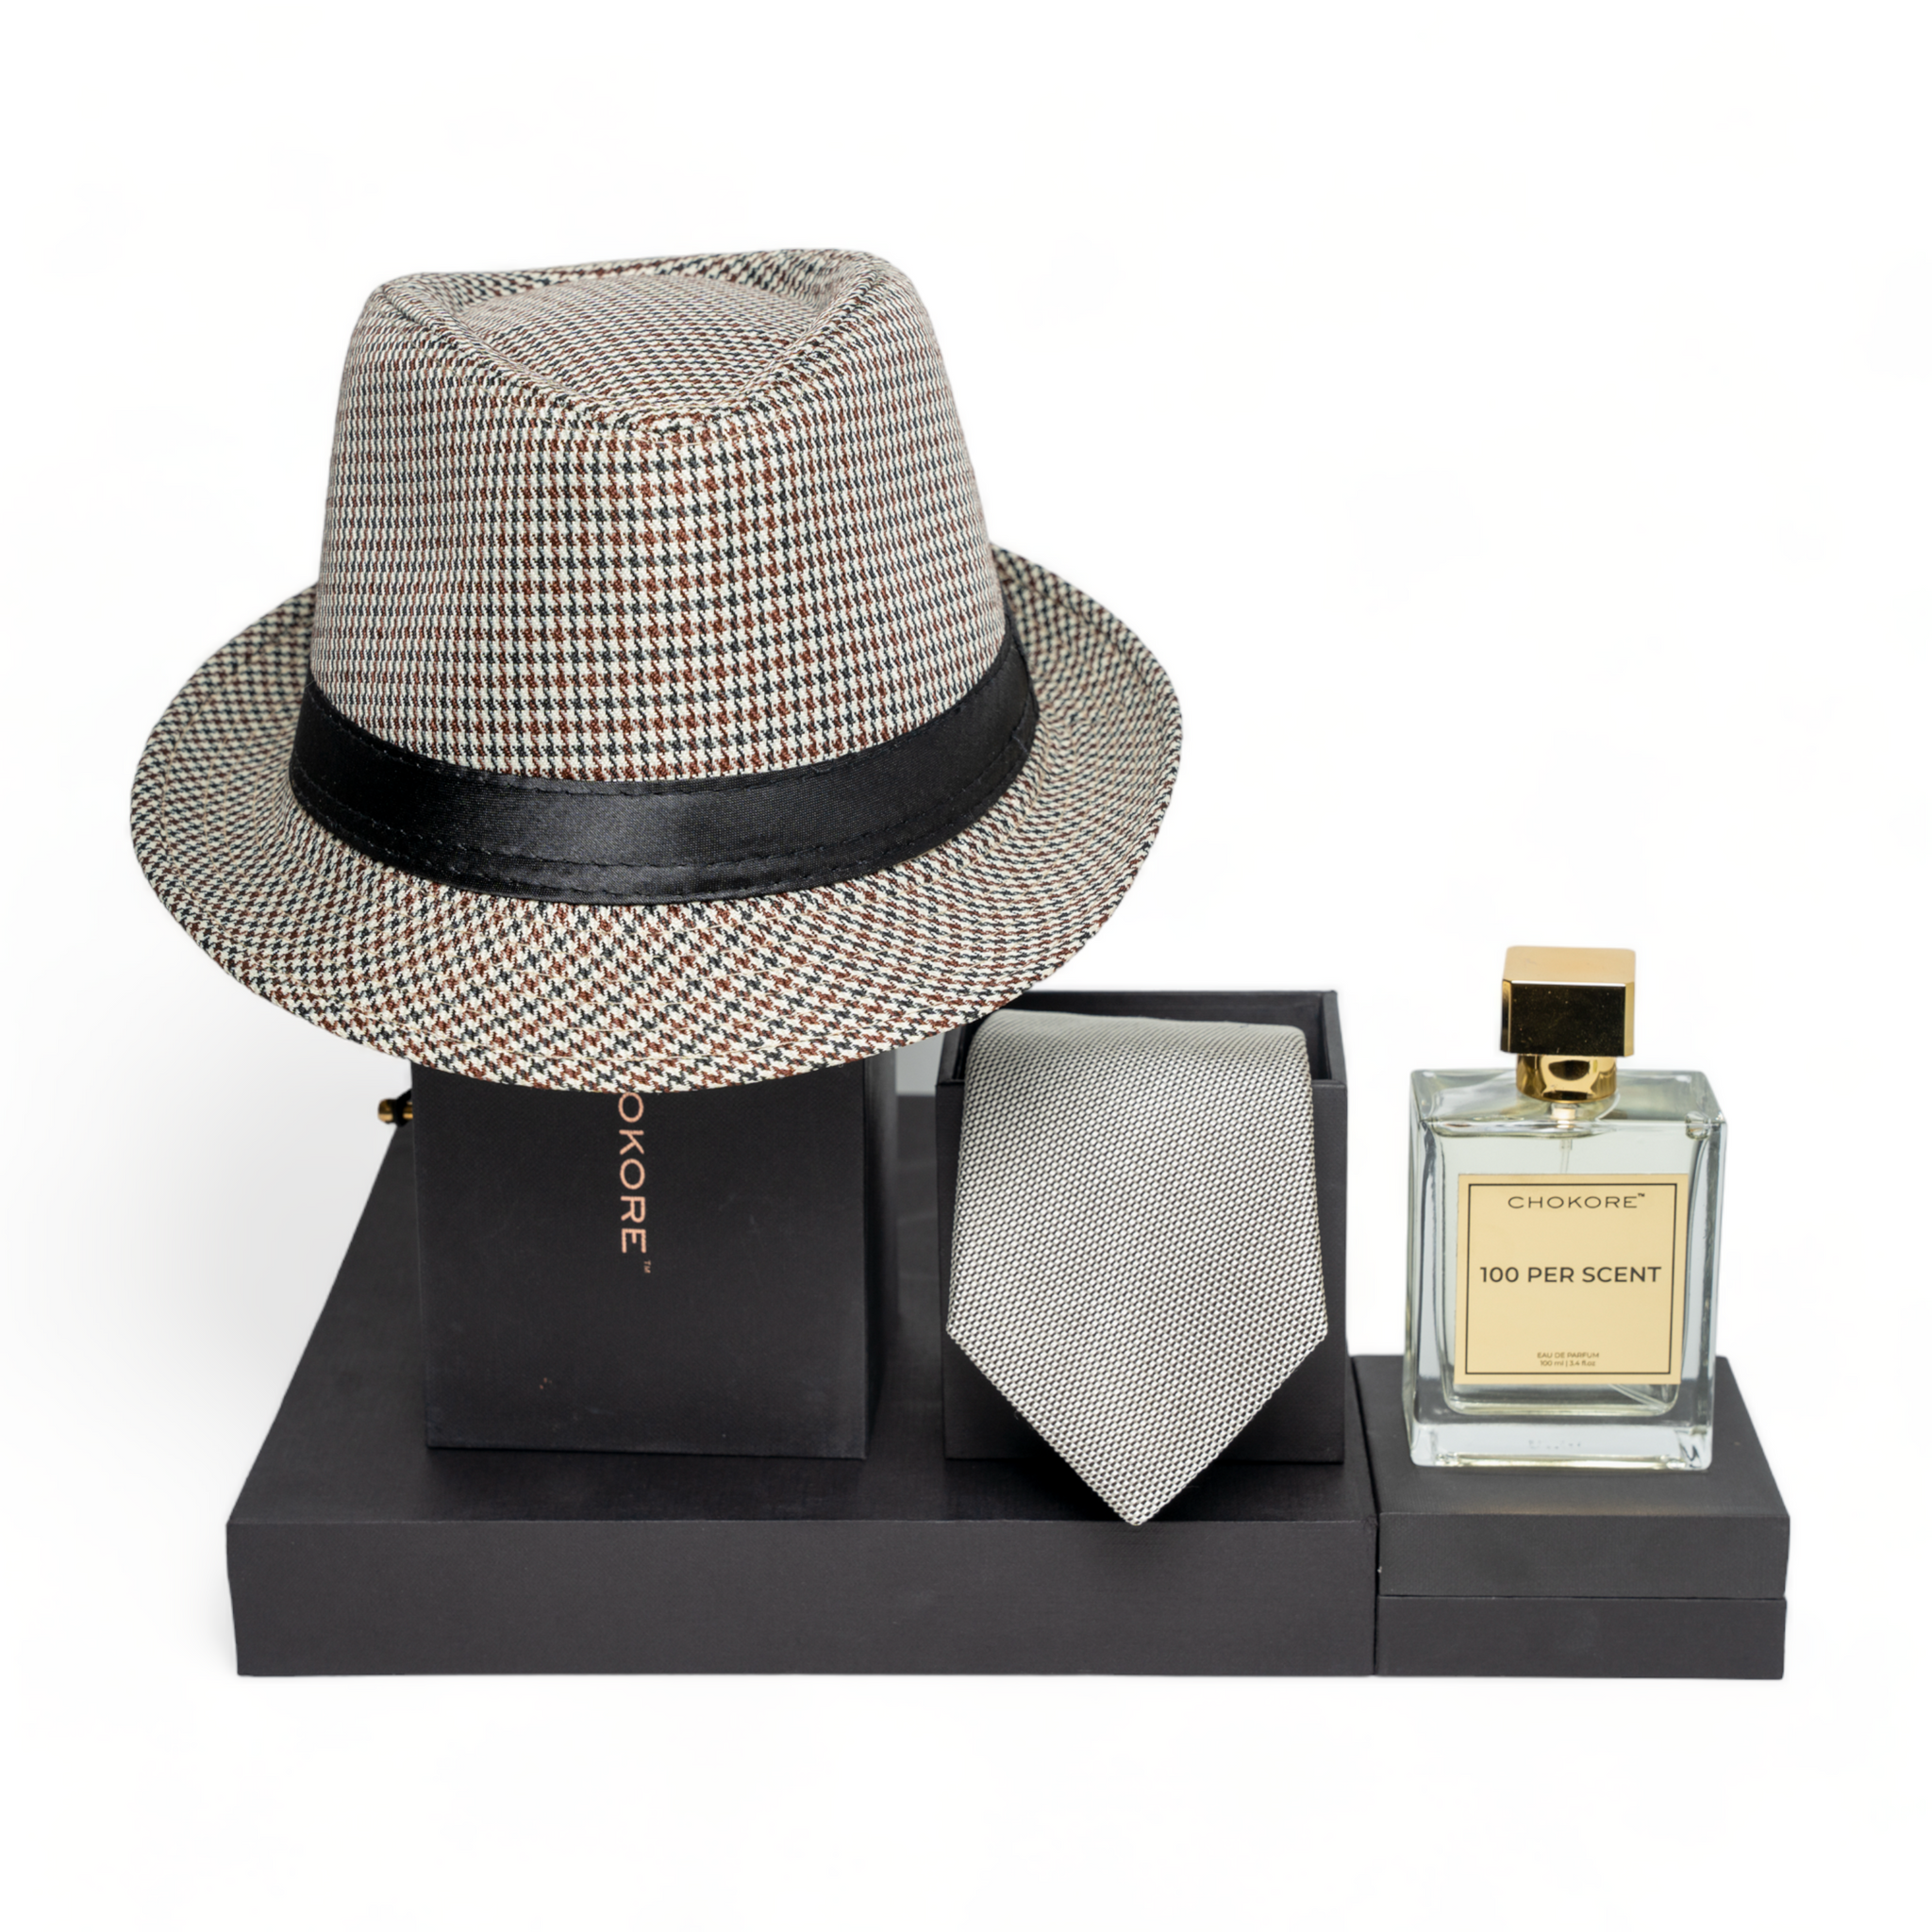 Chokore Special 3-in-1 Gift Set for Him (Fedora Hat, Necktie, & 100 Per Scent Perfume)